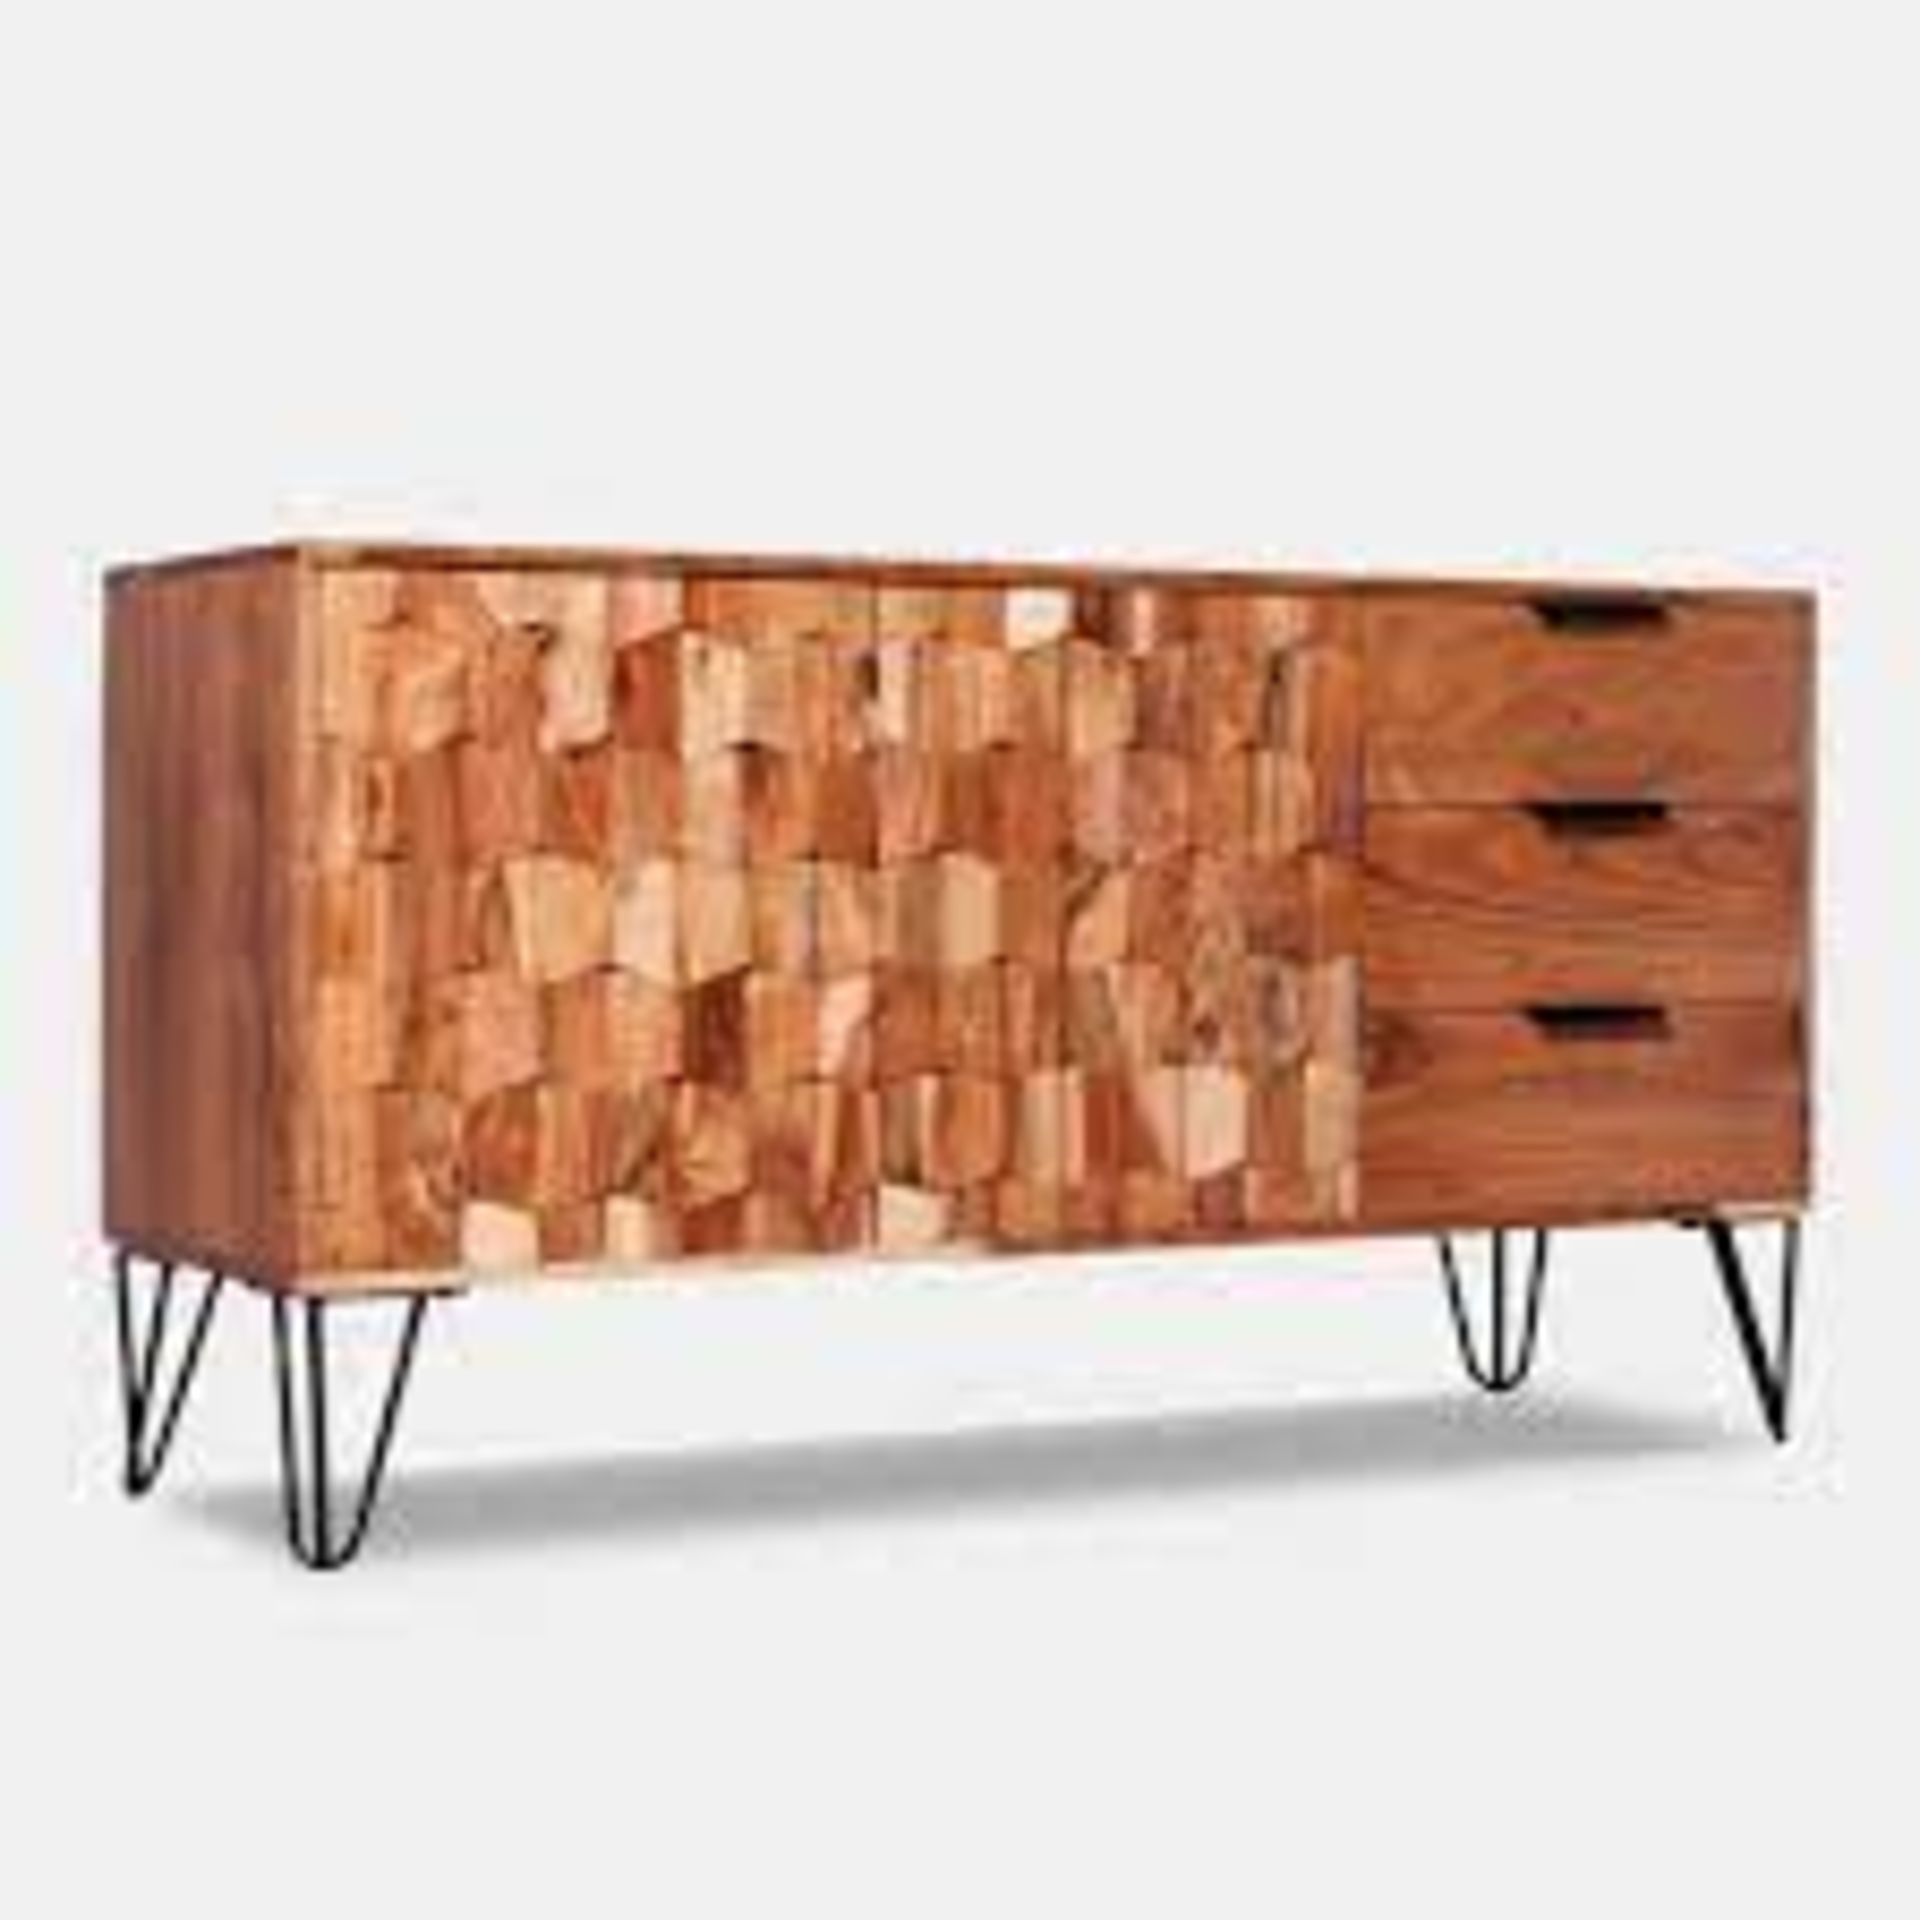 Amelia Large Carved Sideboard. RRP £619.00. Crafted from high-quality acacia wood, this modern